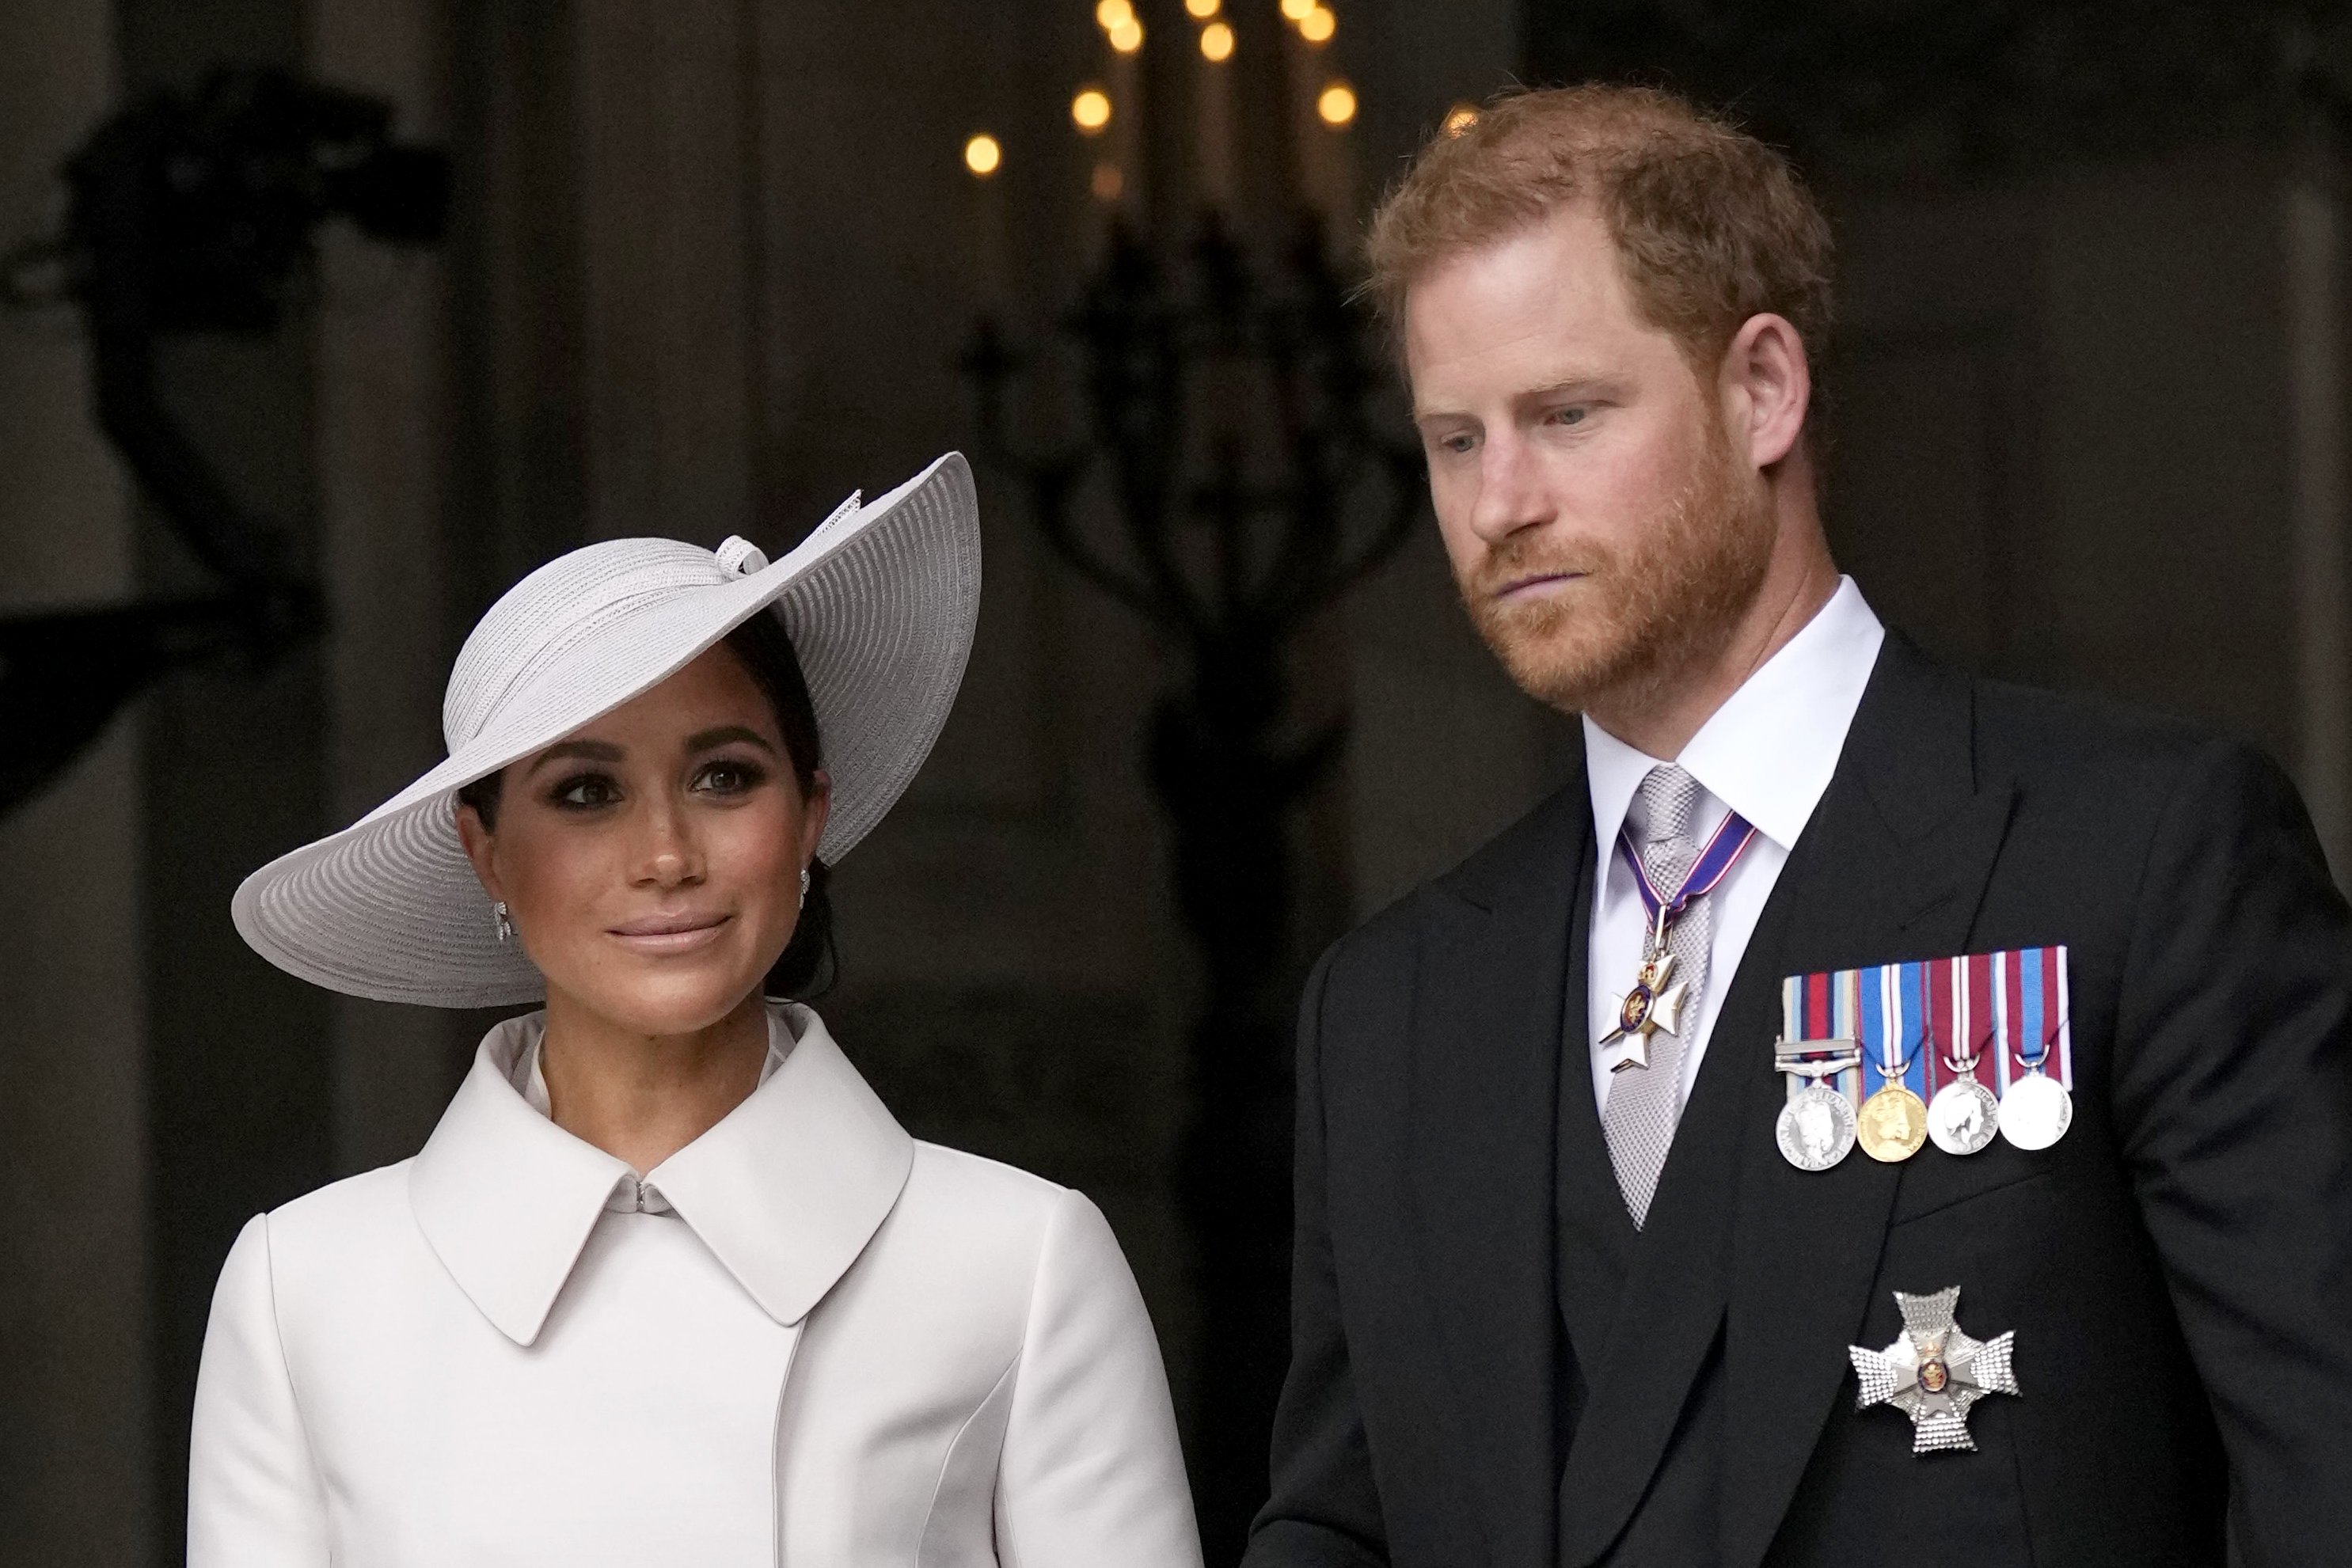 Duchess Meghan and Prince Harry after a service of thanksgiving for the reign of Queen Elizabeth II at St Paul's Cathedral in London, on June 3, 2022. | Source: Getty Images